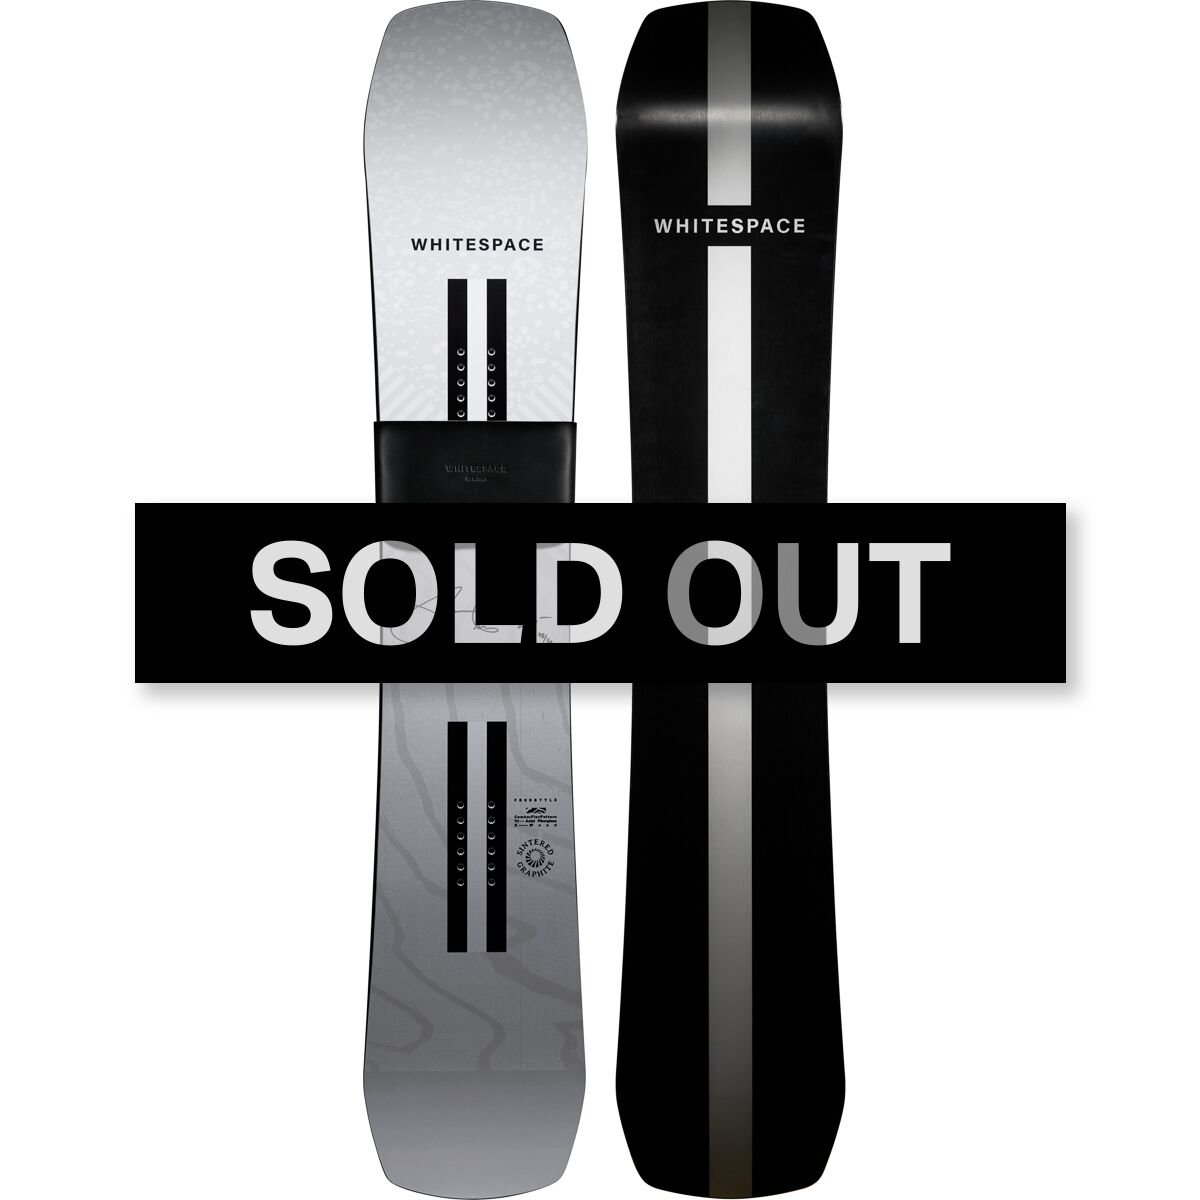 WHITESPACE Shaun White Pro - Limited Edition Autographed Snowboard